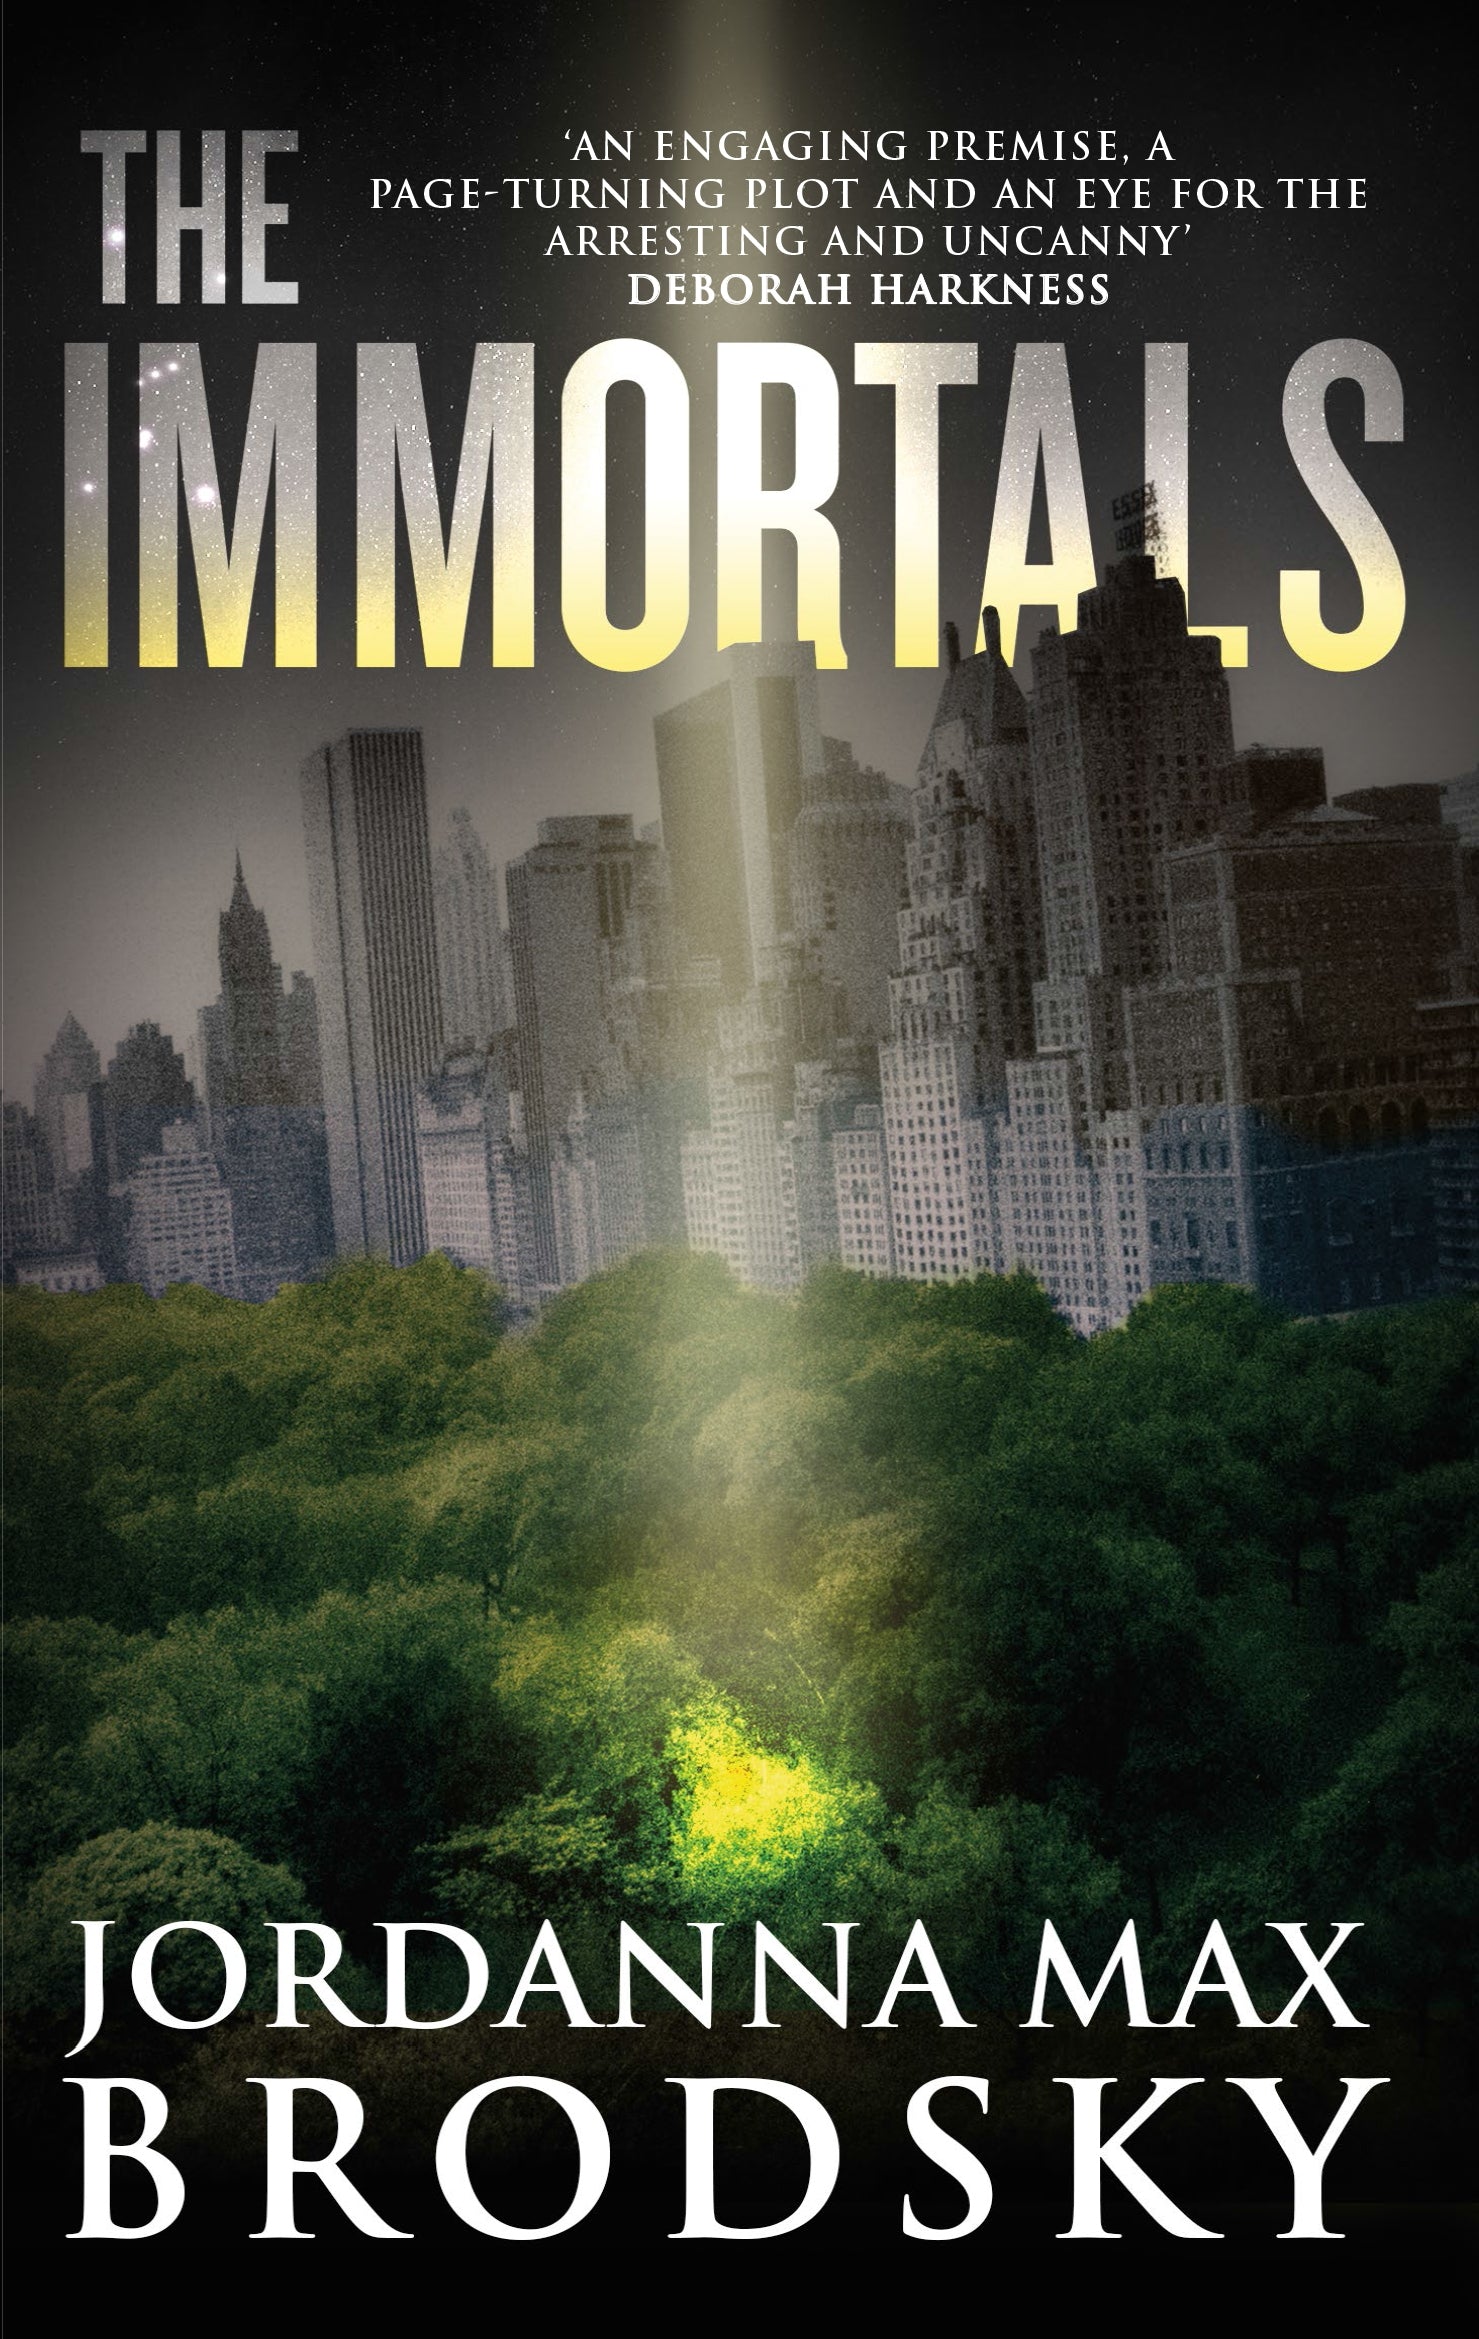 The Immortals by Jordanna Max Brodsky